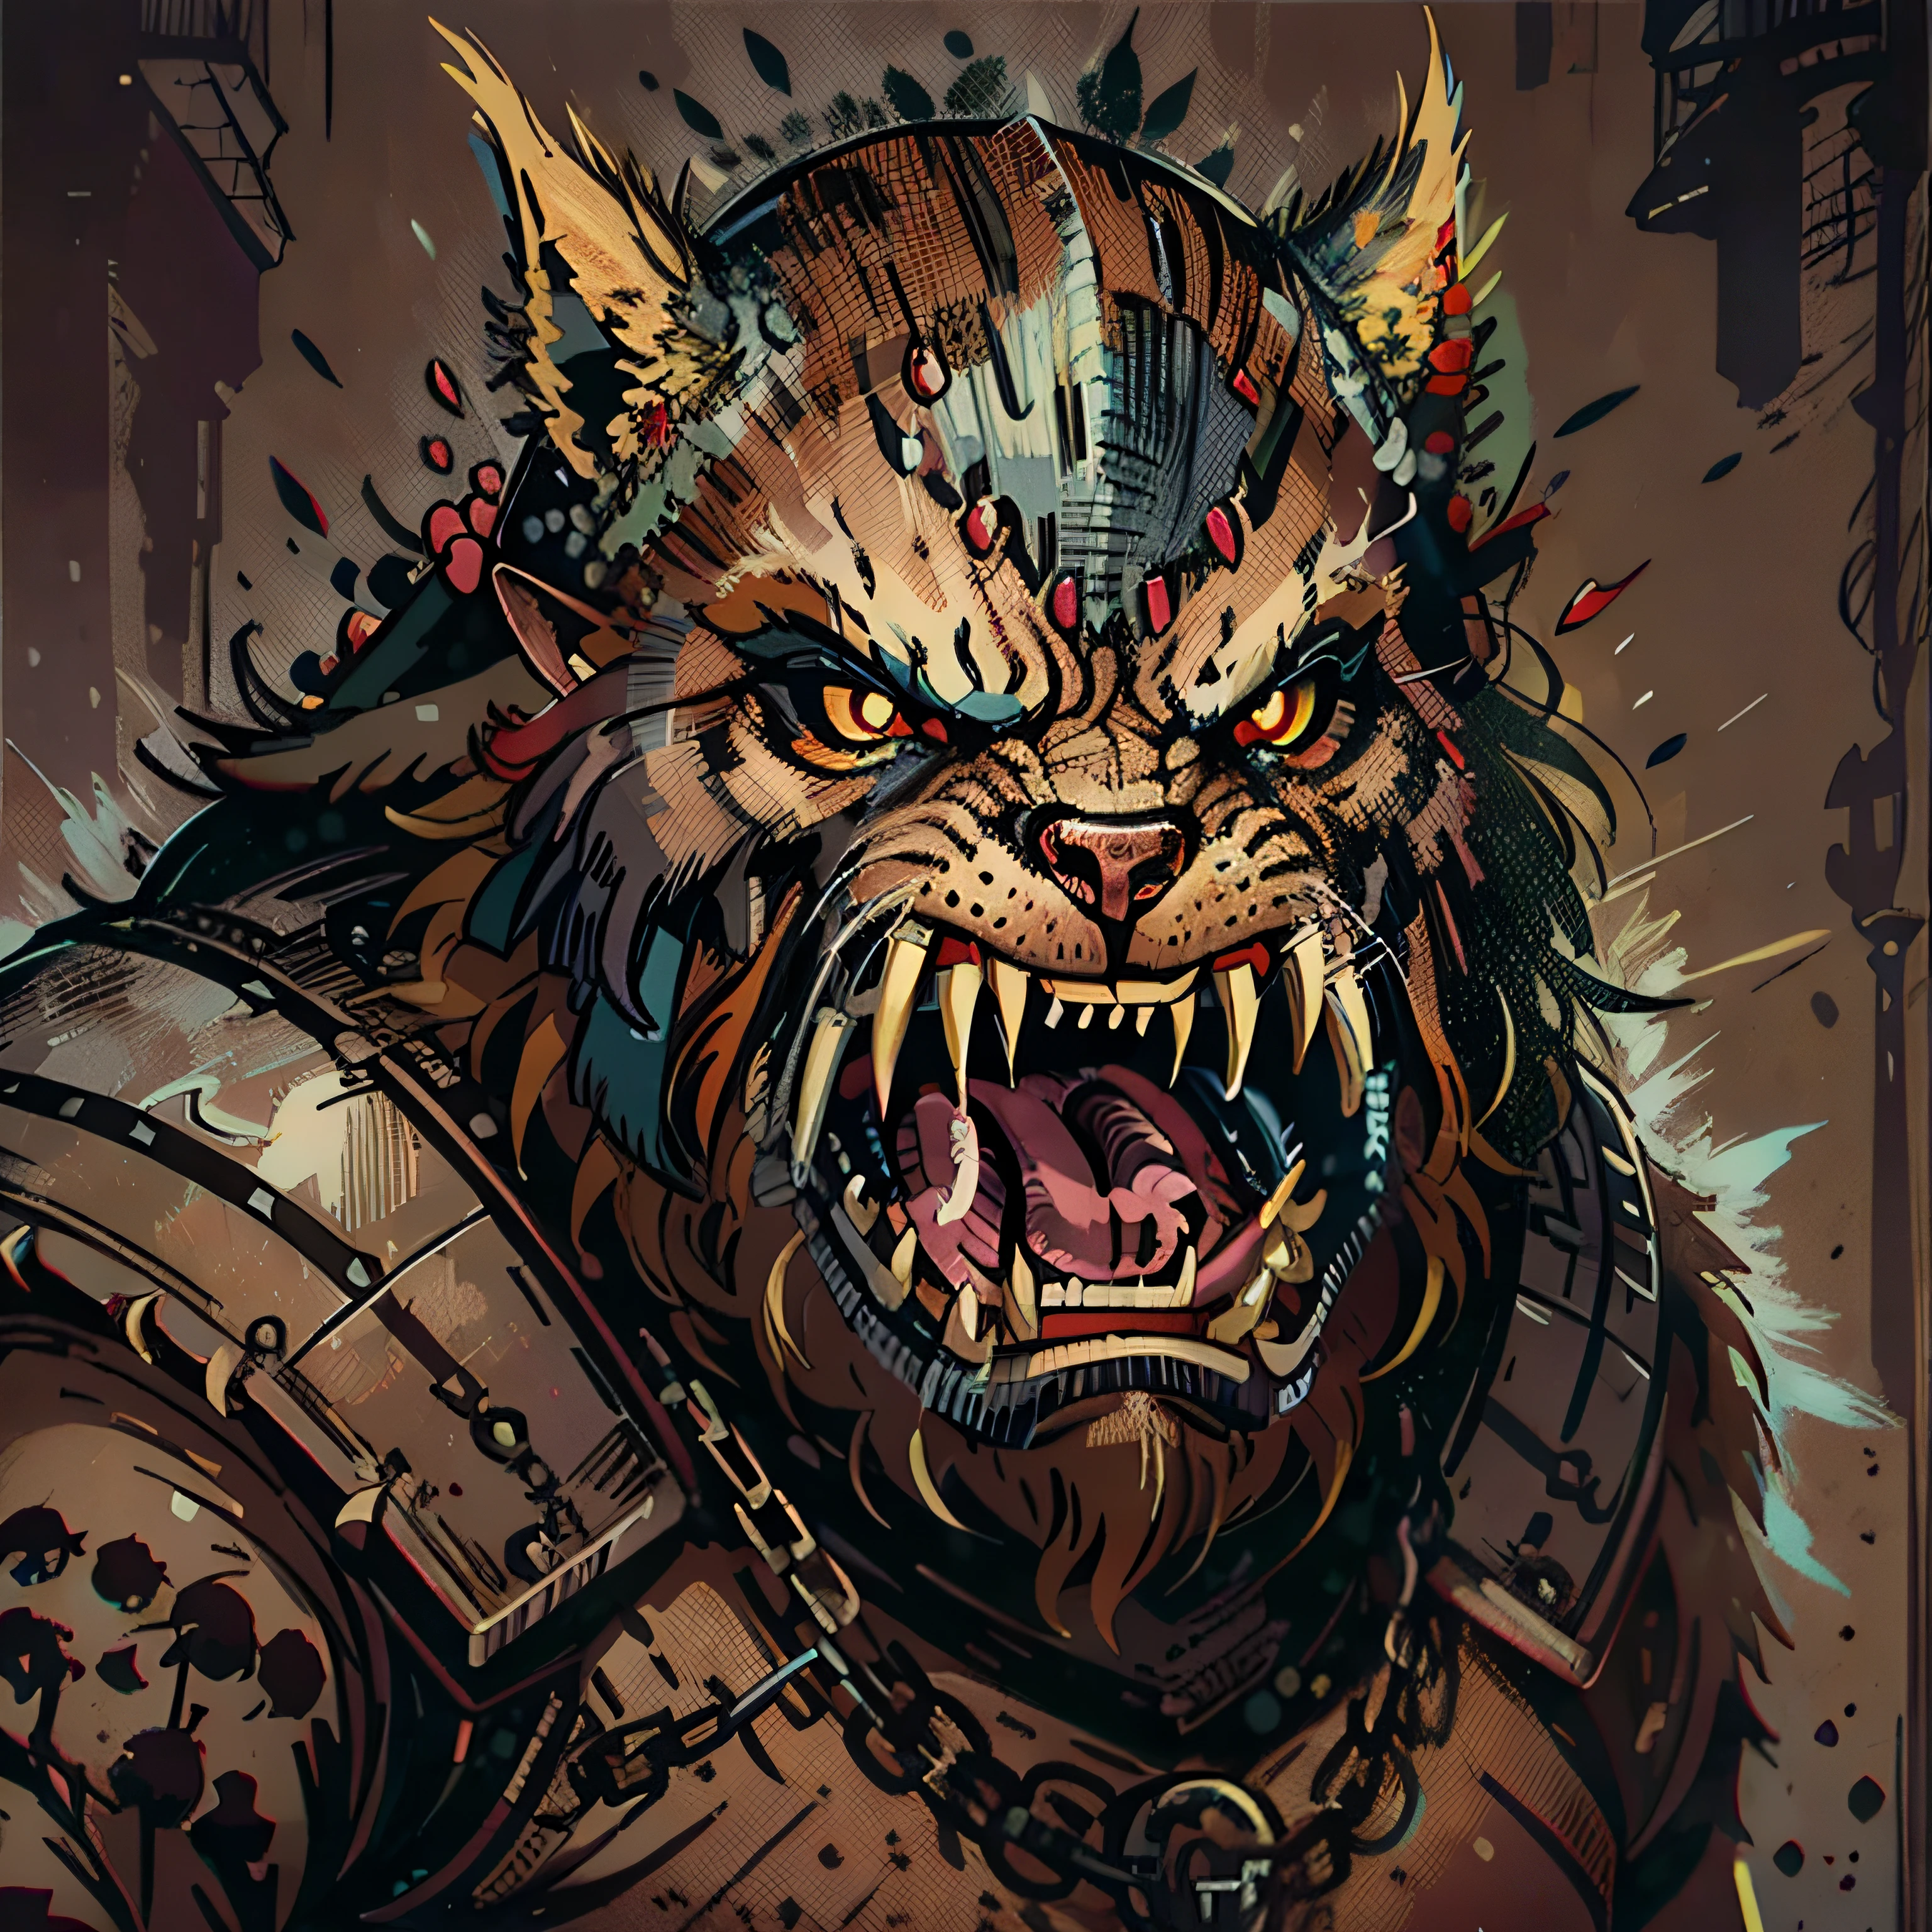 bugbear, humanoid, angry dog face, scary, brute, medieval monster